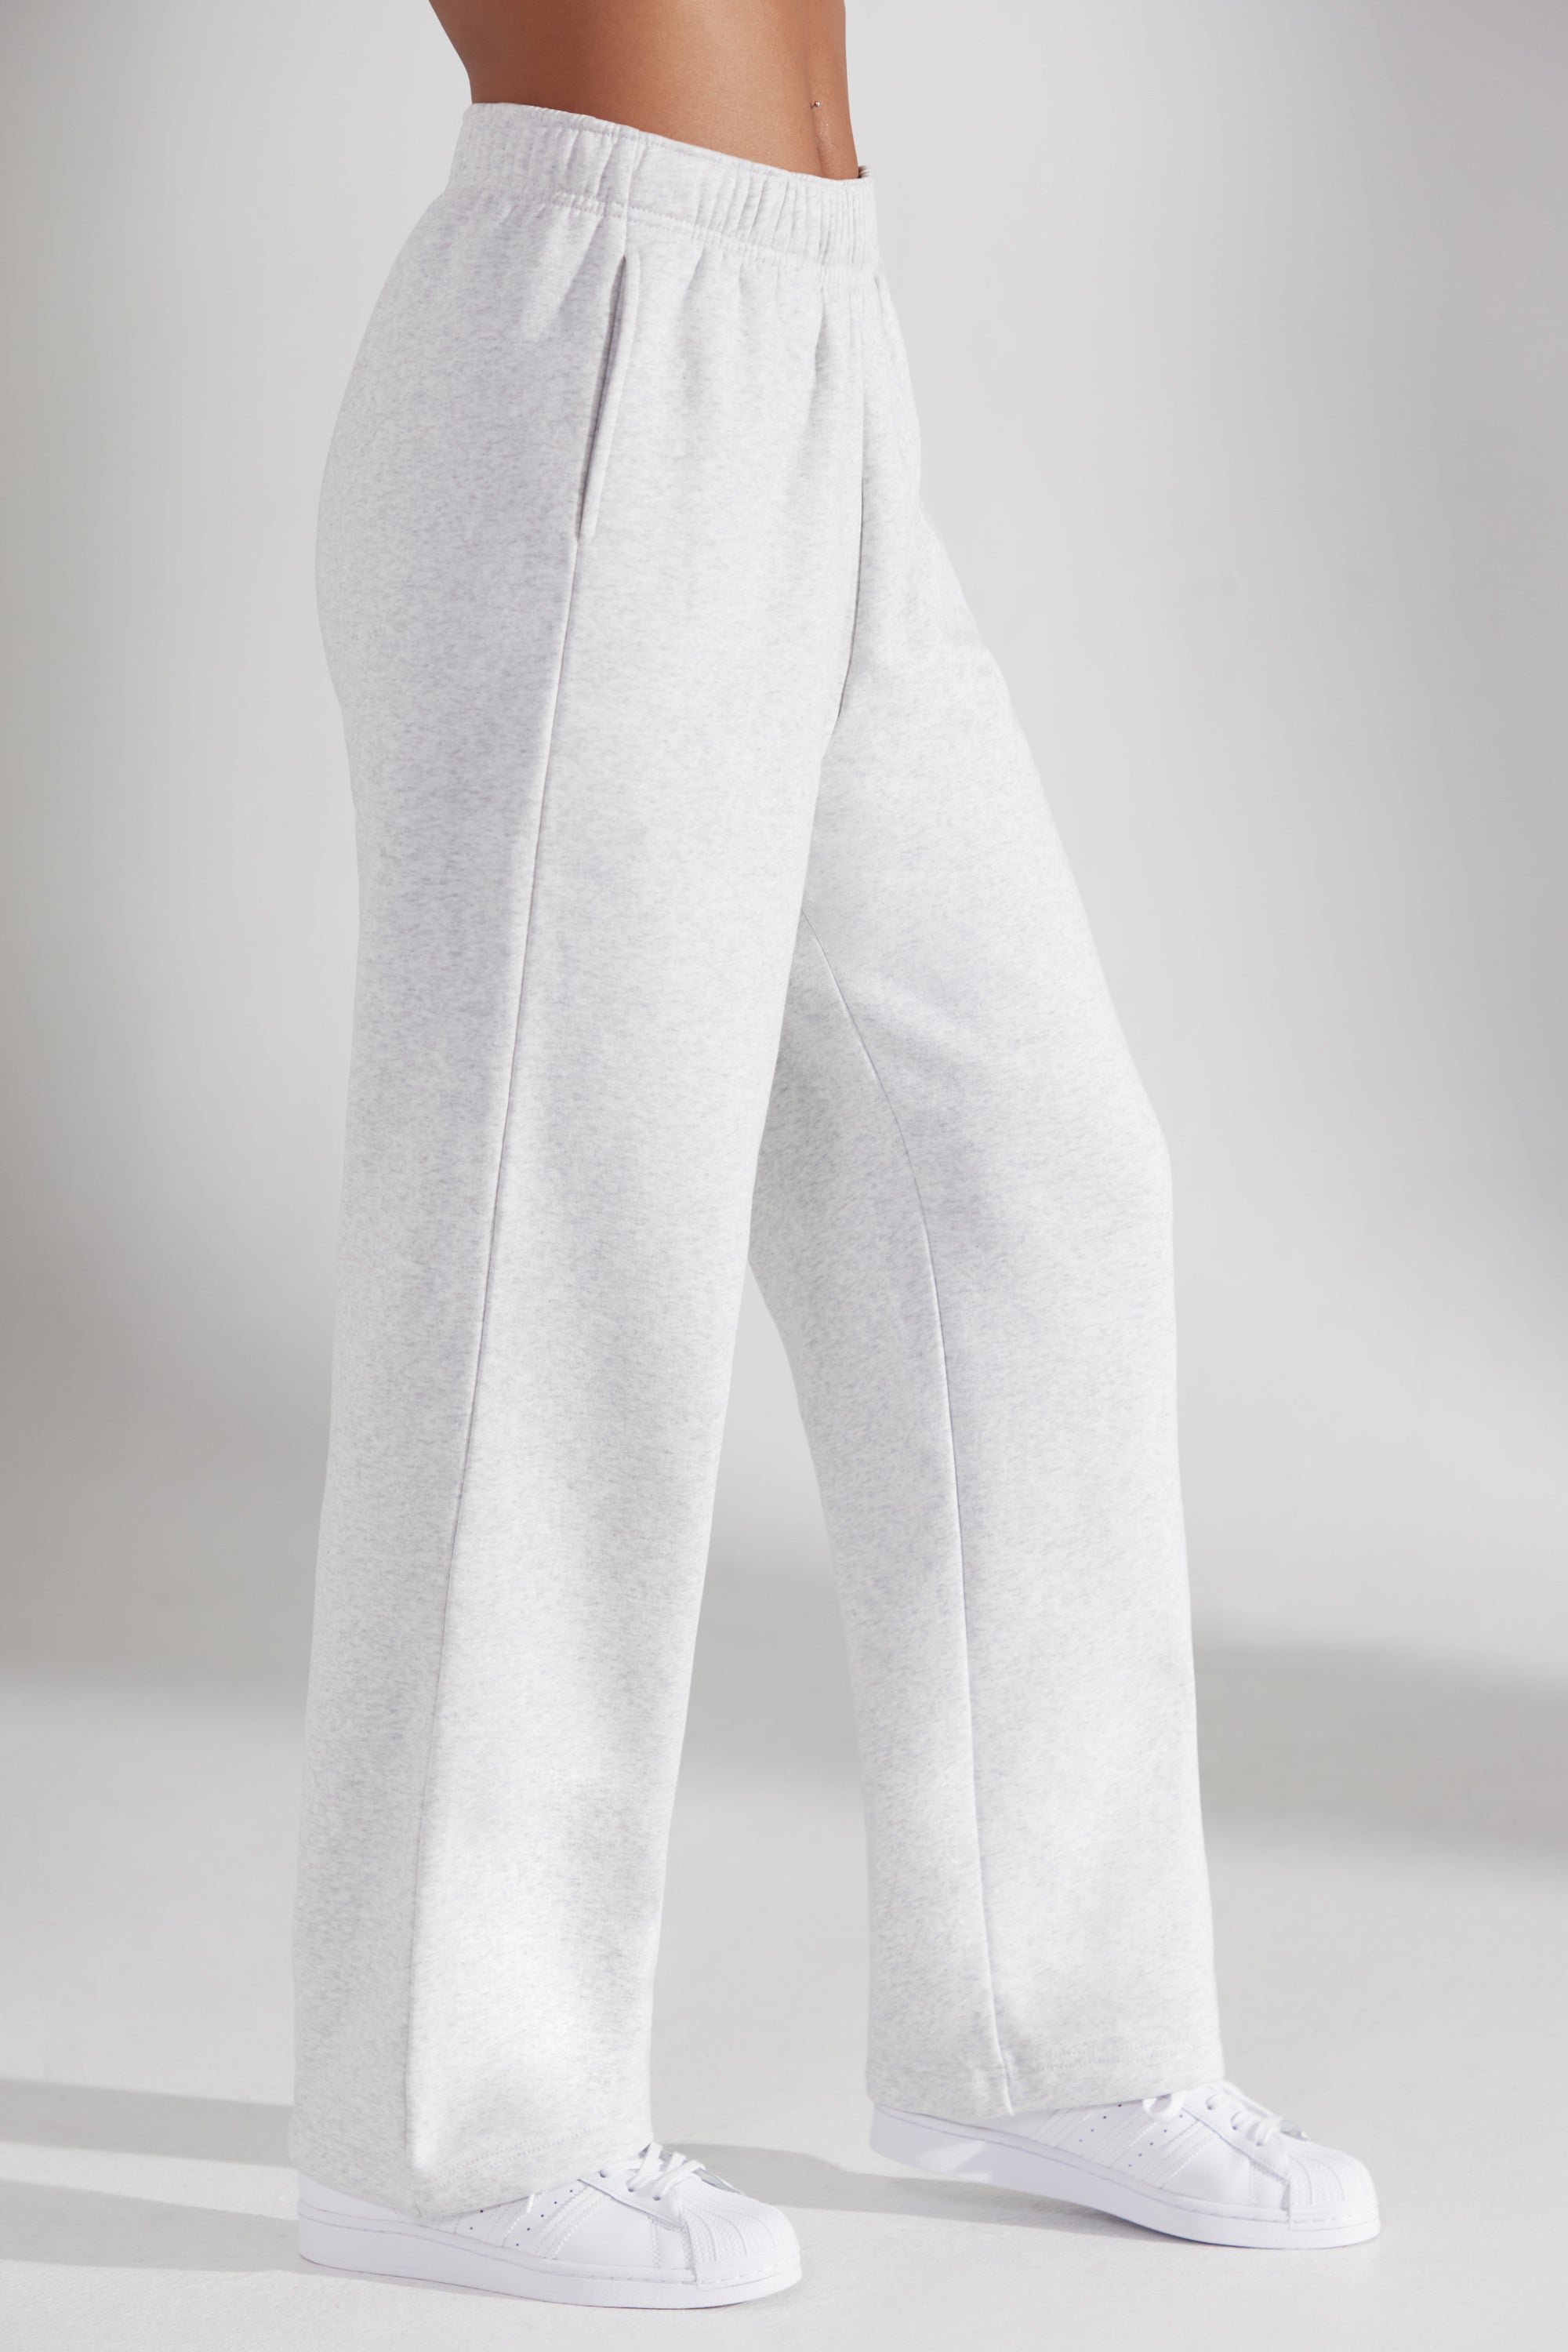 COLLUSION 90's dad wide leg seam front sweatpants in gray heather